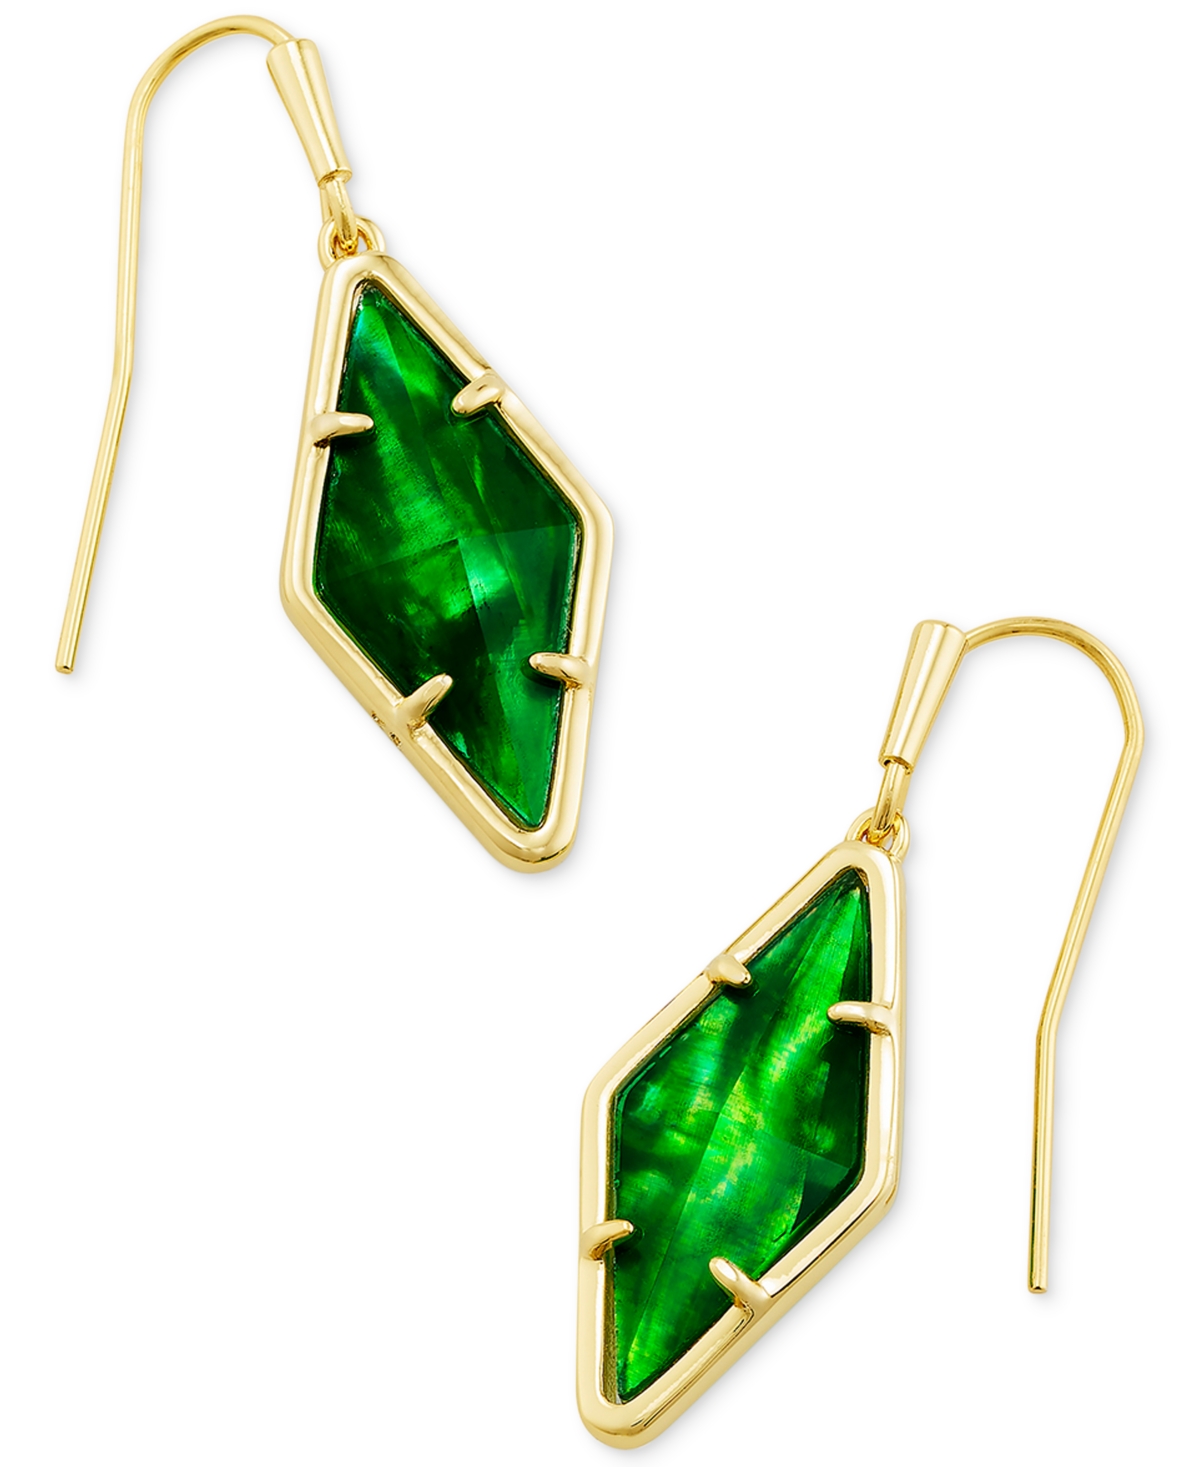 14k Gold-Plated Mother-of-Pearl Diamond-Shape Drop Earrings - GOLD KELLY GREEN ILLUSION